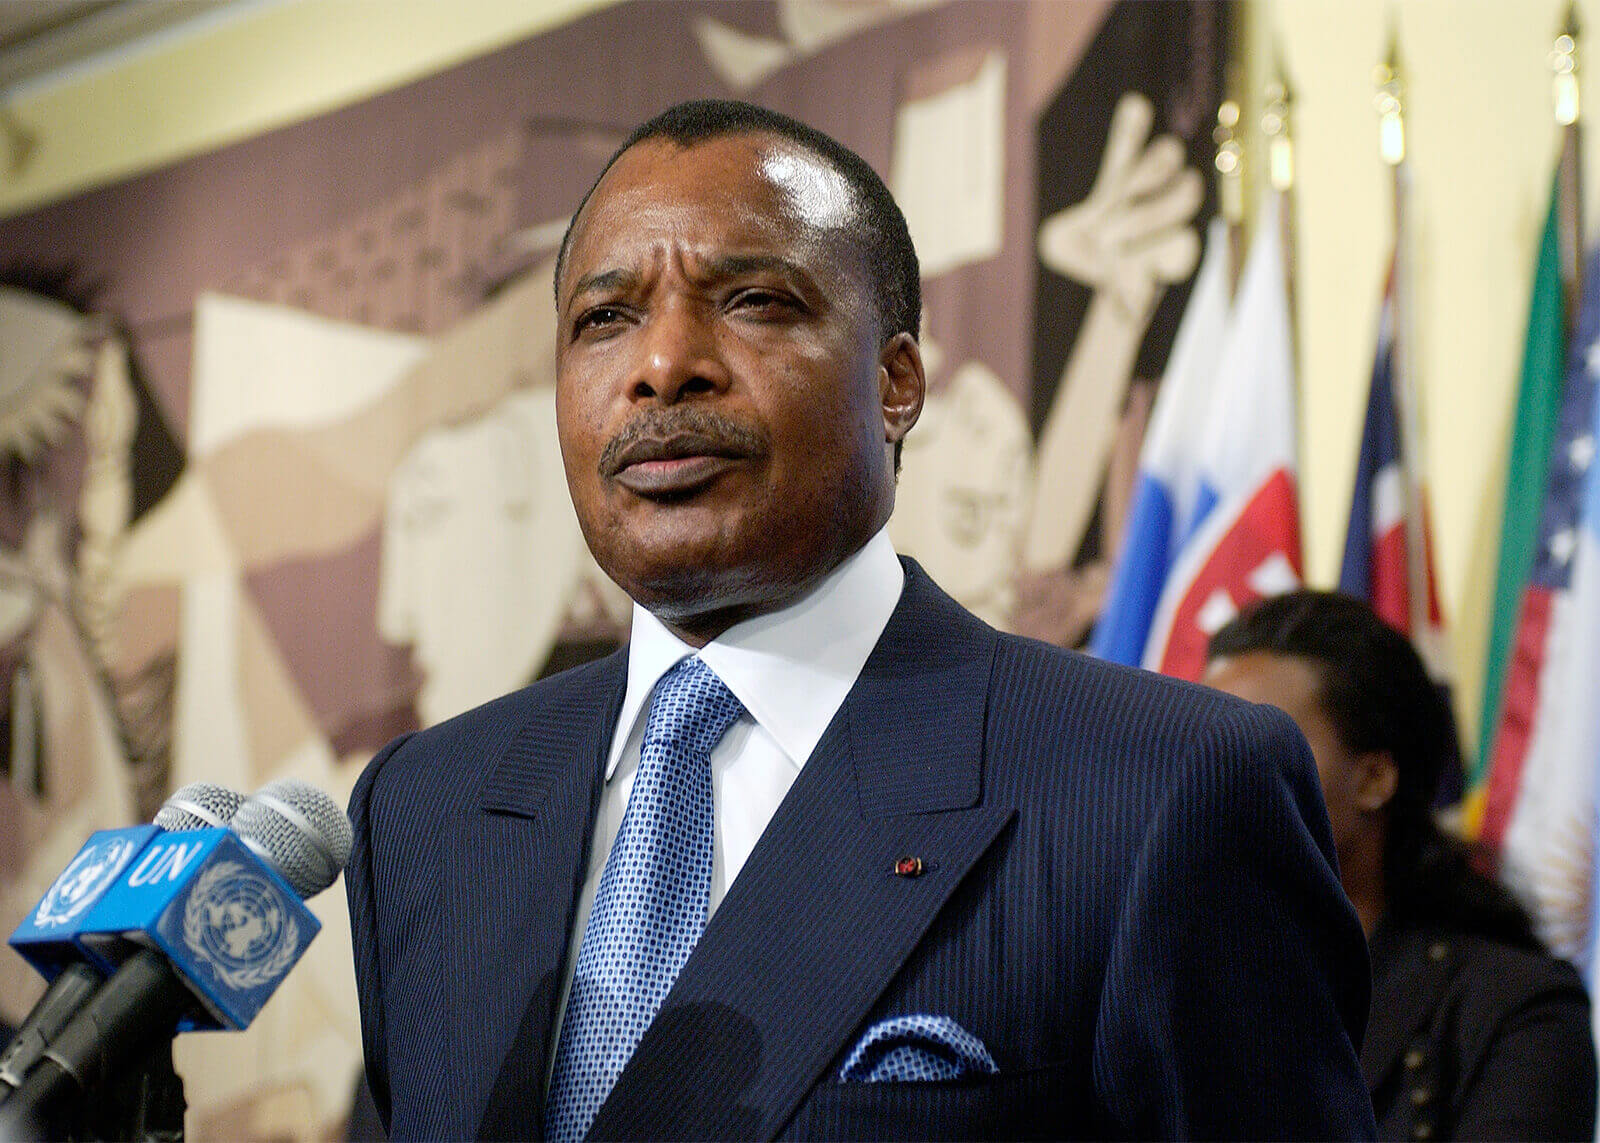 Congo-Brazzaville President Sassou-Nguesso Re-Elected After Main Opposition Party Boycott